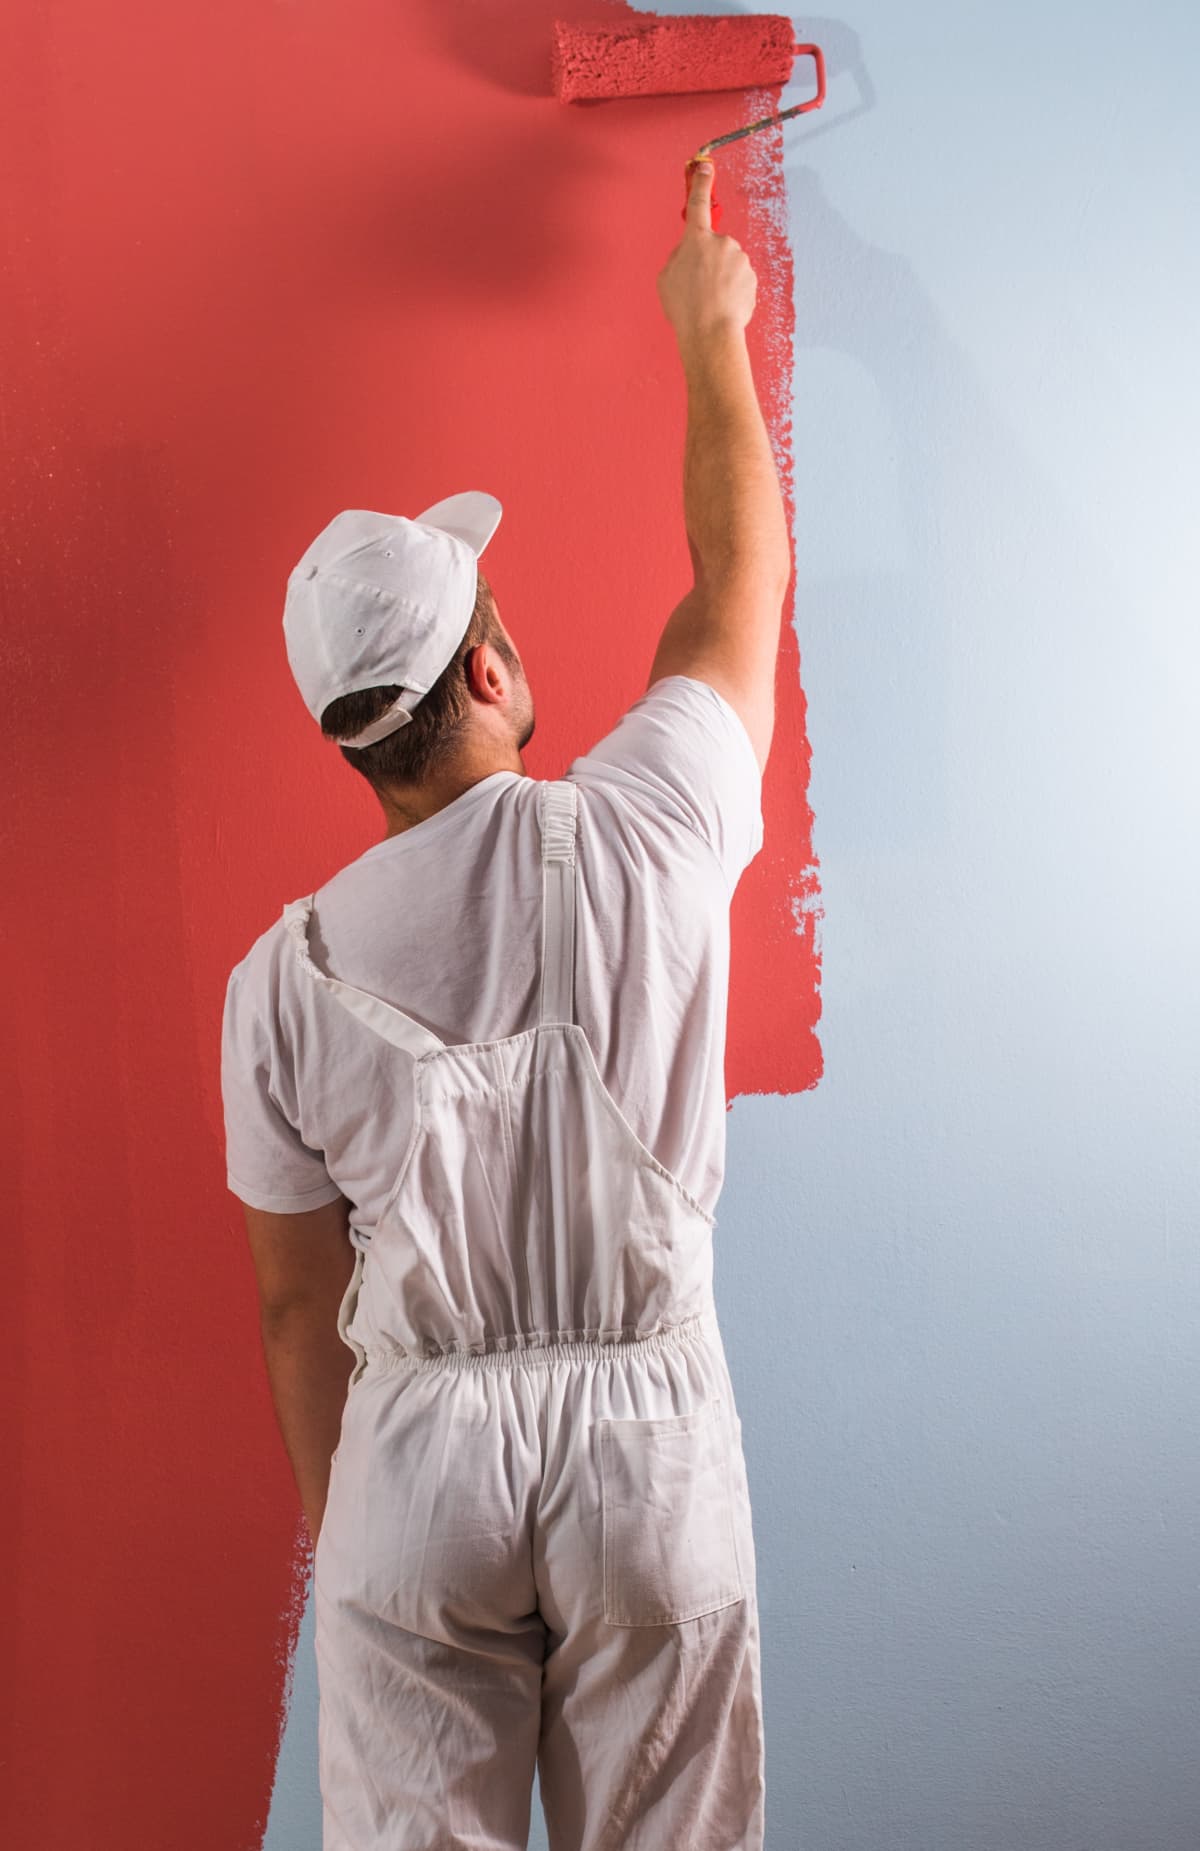 A man painting a wall using a paint roller